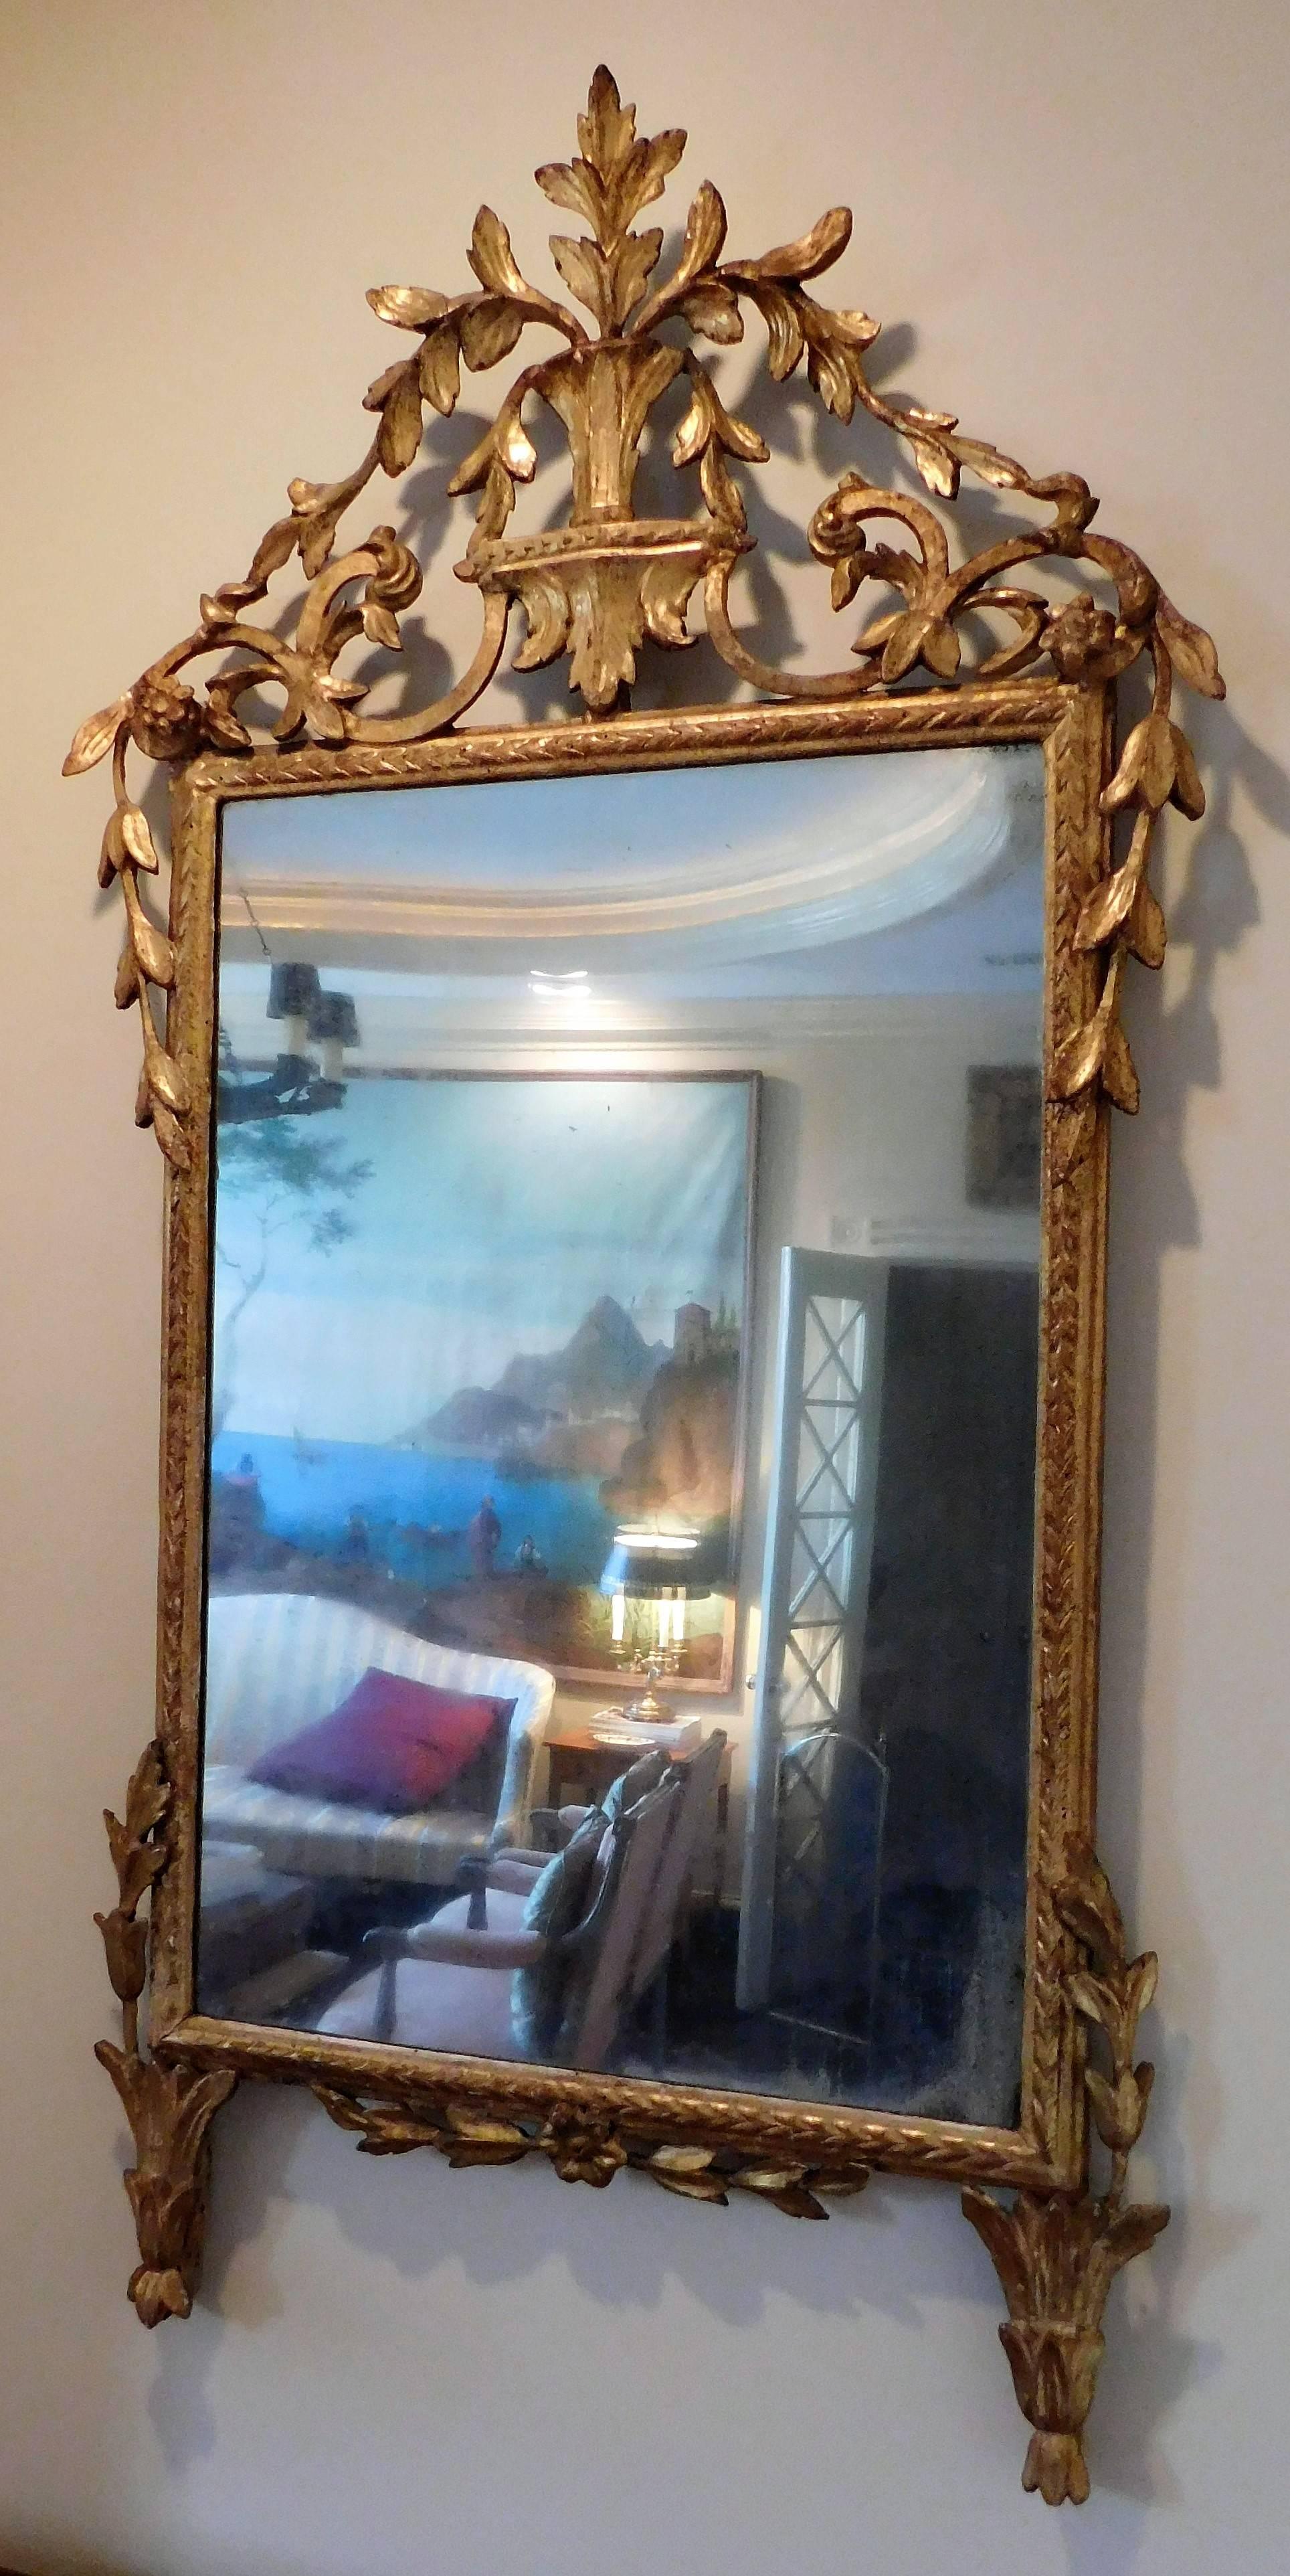 Probably made in Florence. Gilt and gold leaf on gesso on wood. Original wooden back. Mirror appears to be original. Excellent hand-carved foliate design.